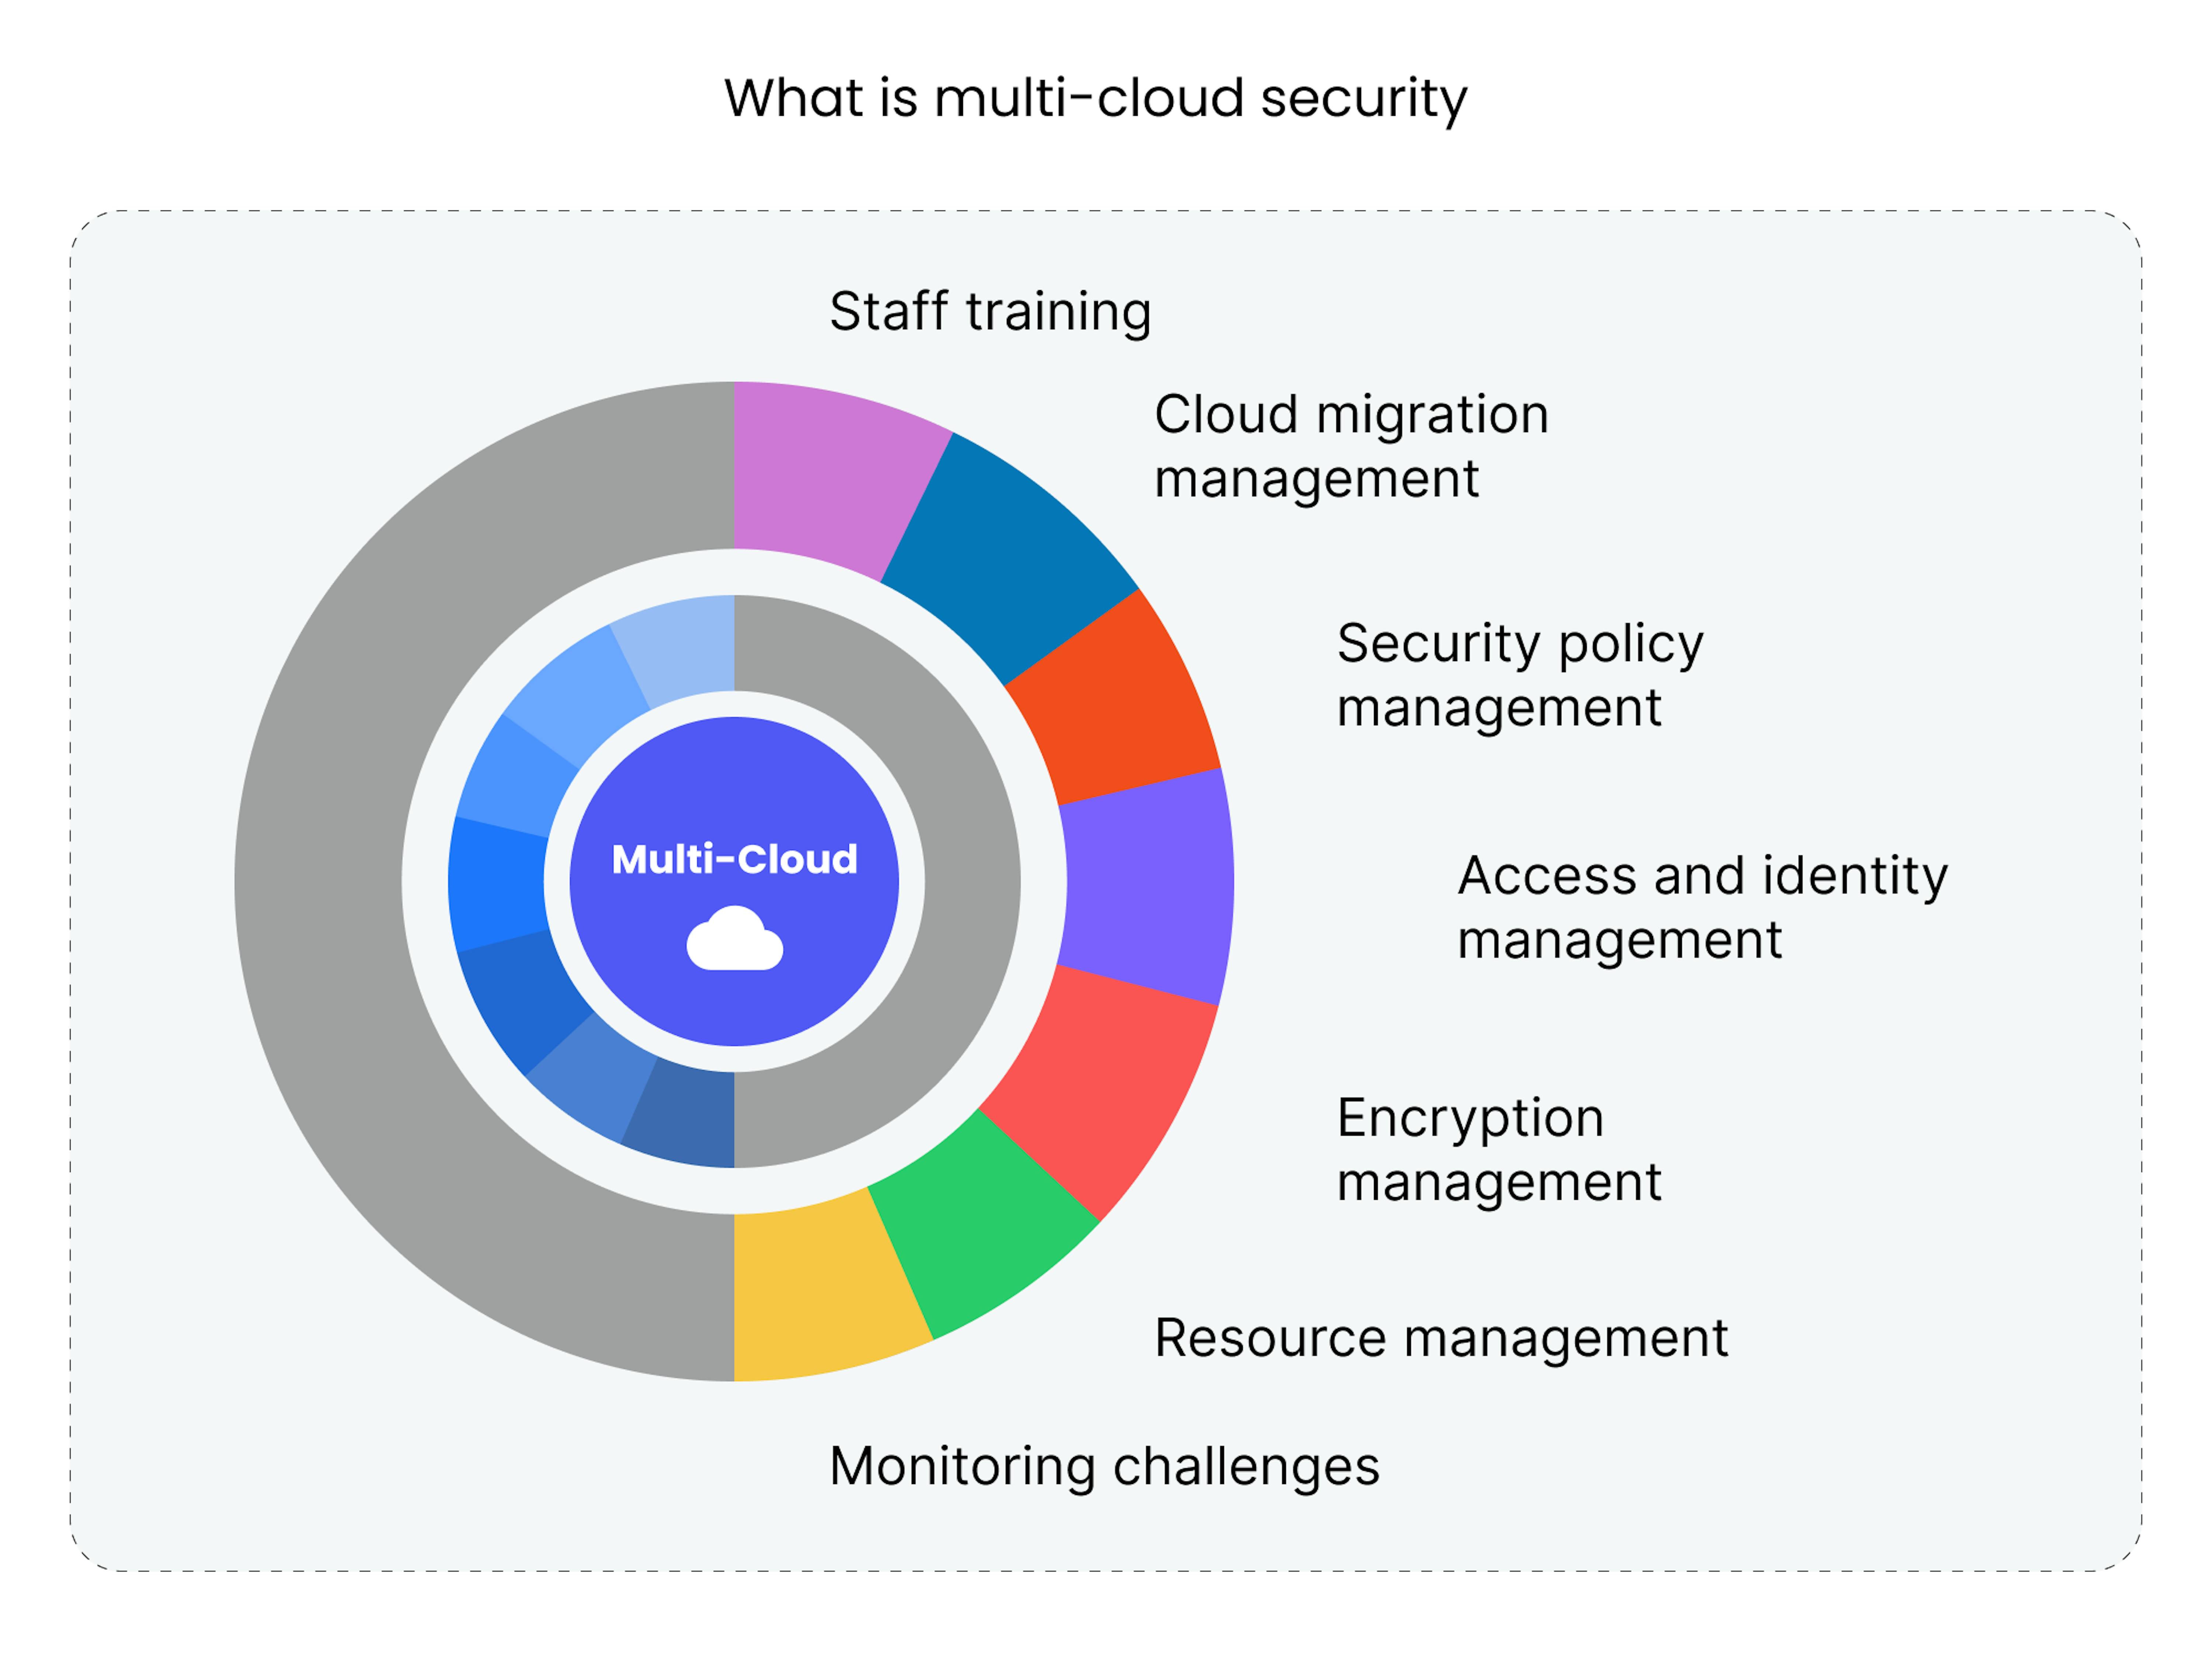 Multi-cloud security challenges